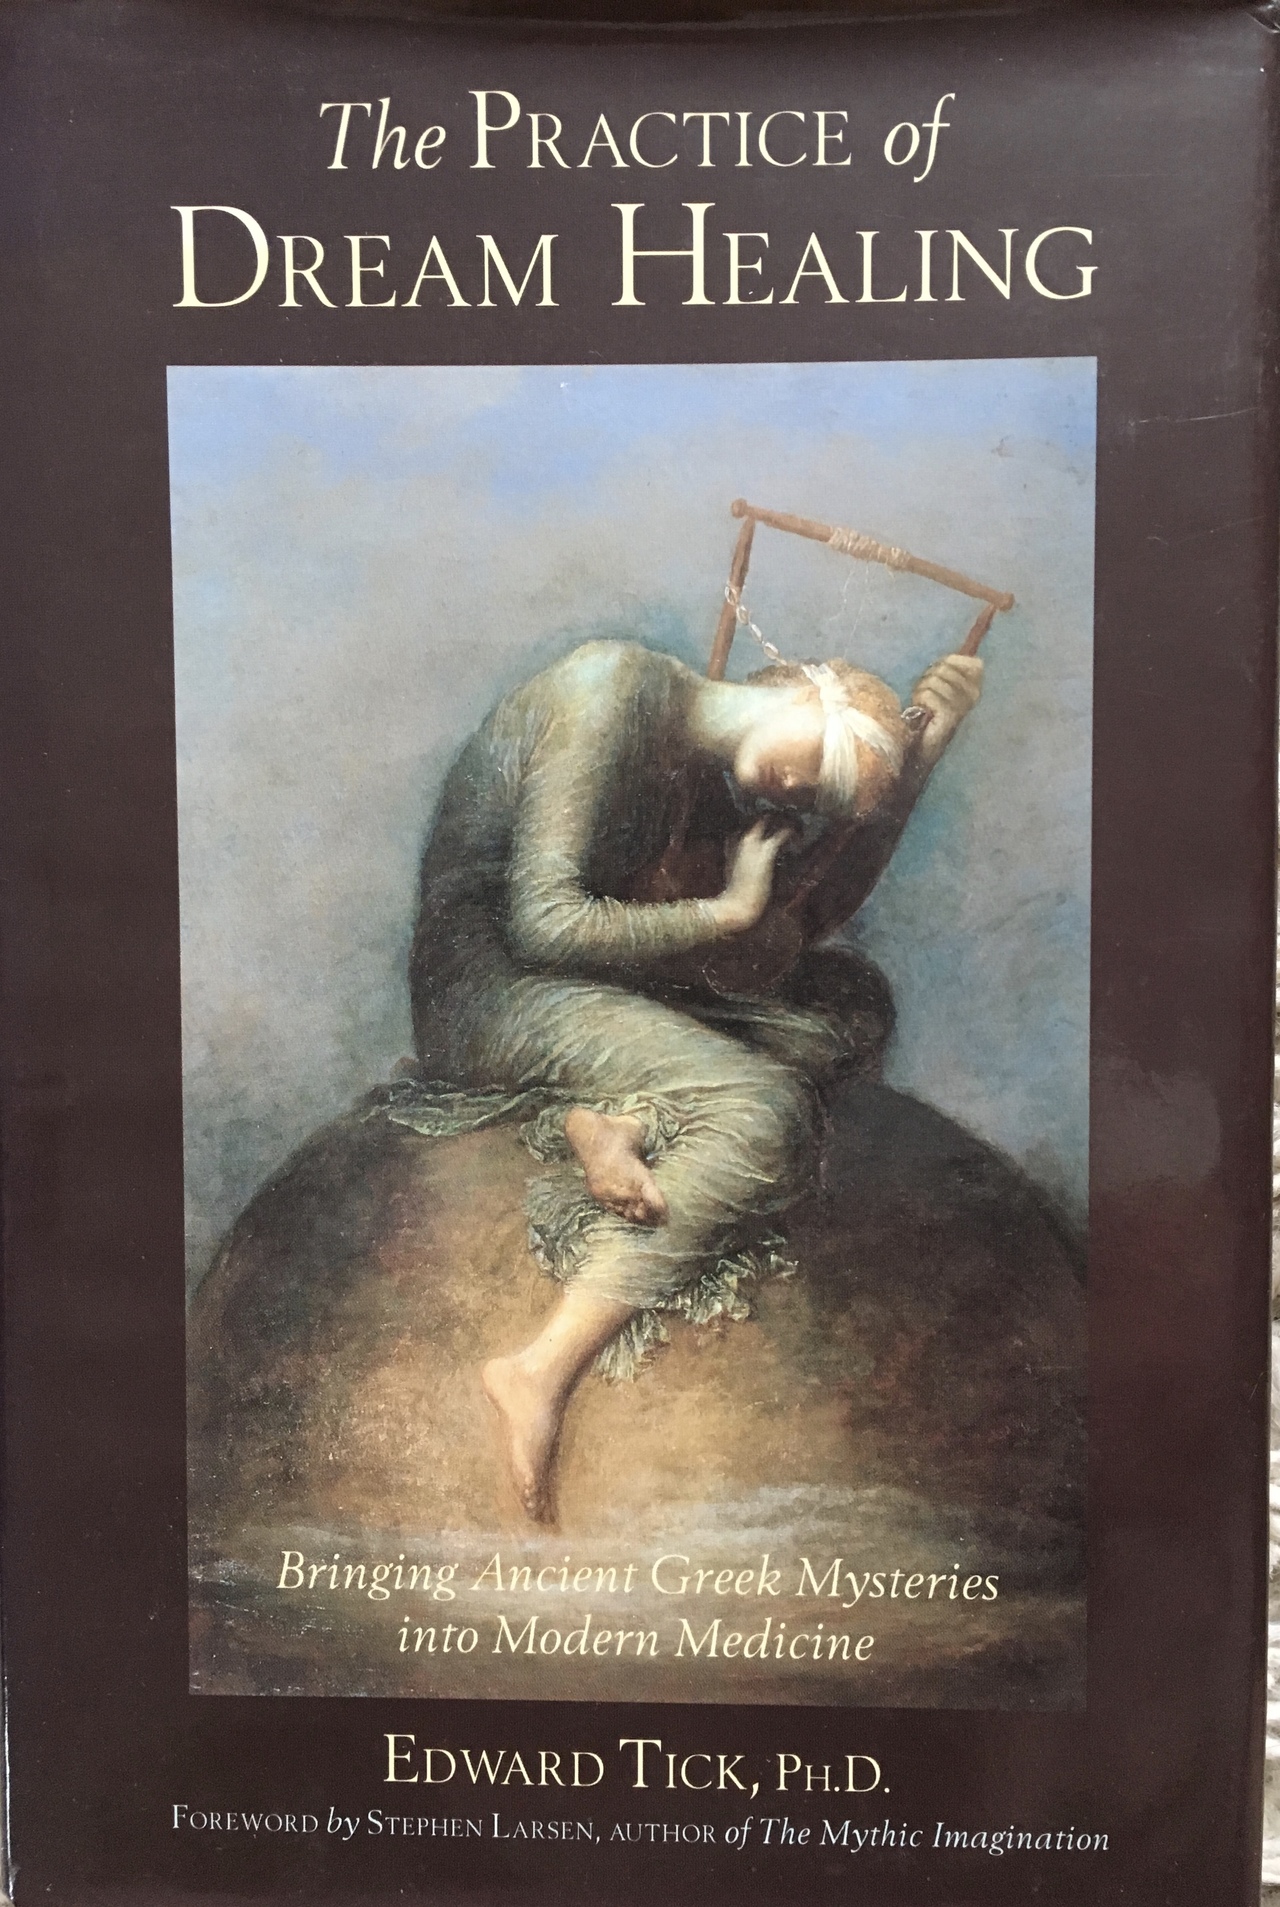 The Practice of Dream Healing: Bringing Ancient Greek Mysteries into Modern Medicine (Quest Books, 2001)